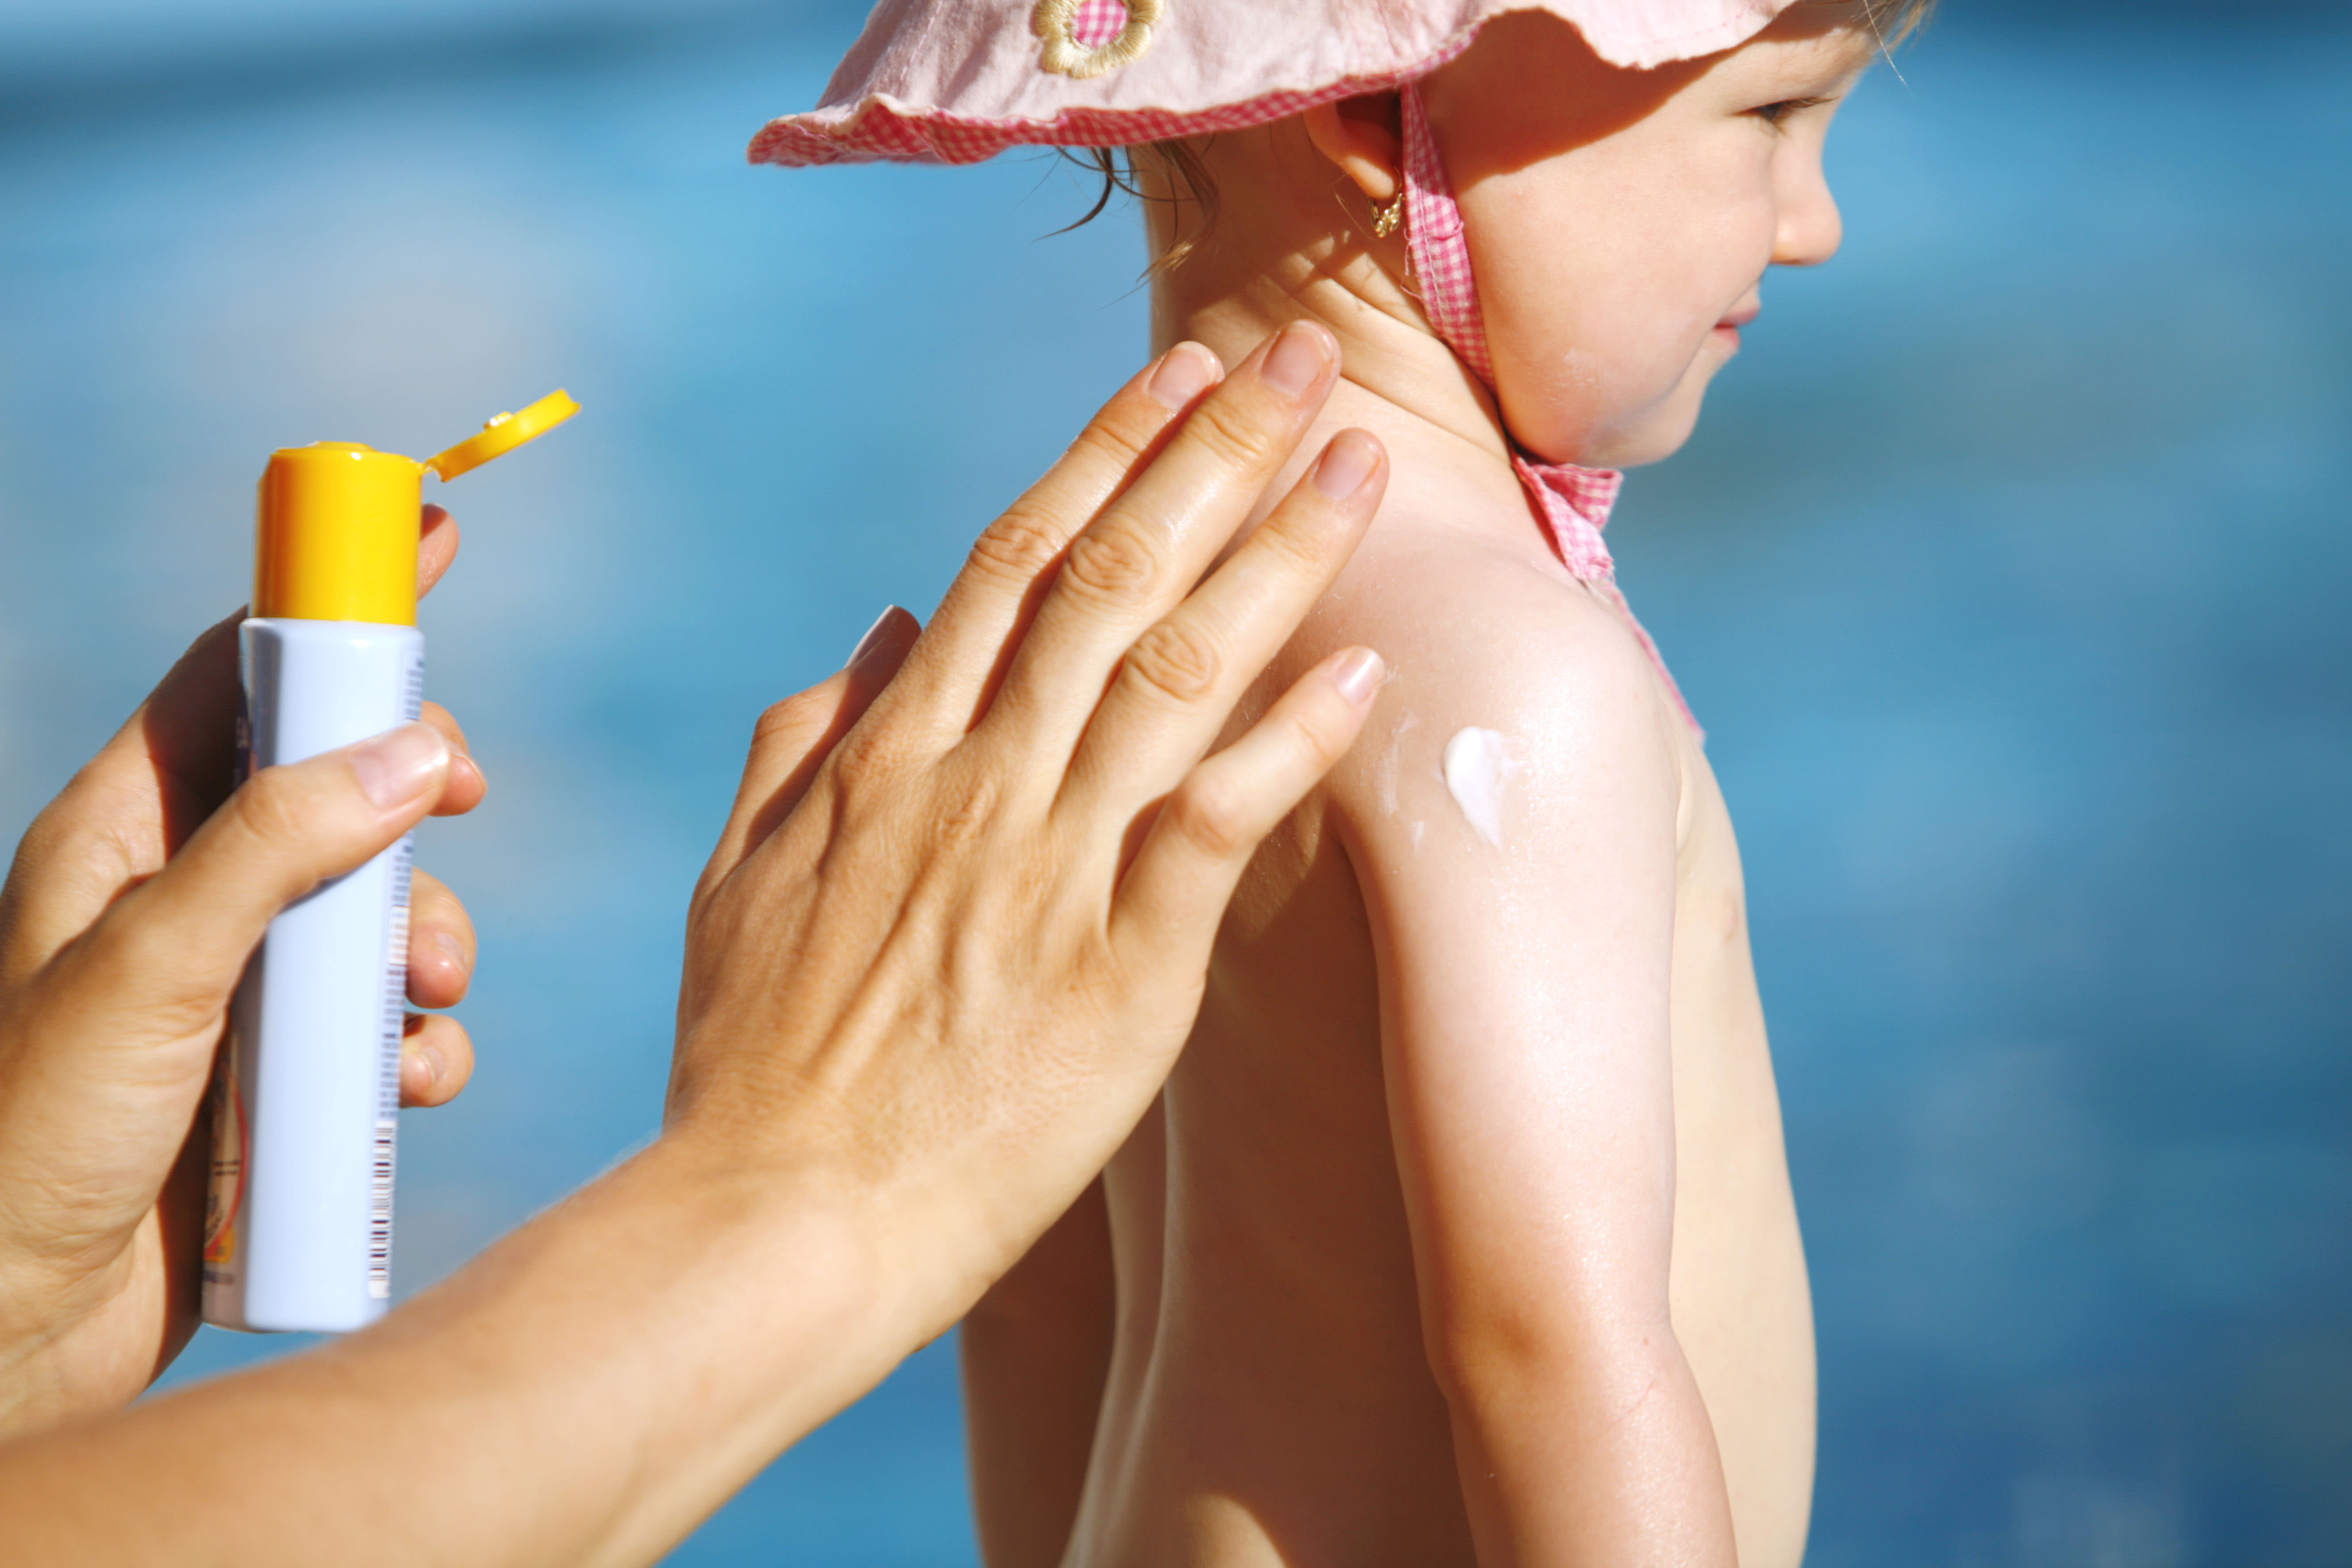 Cases of skin cancer are increasing in Finland as UV radiation increases